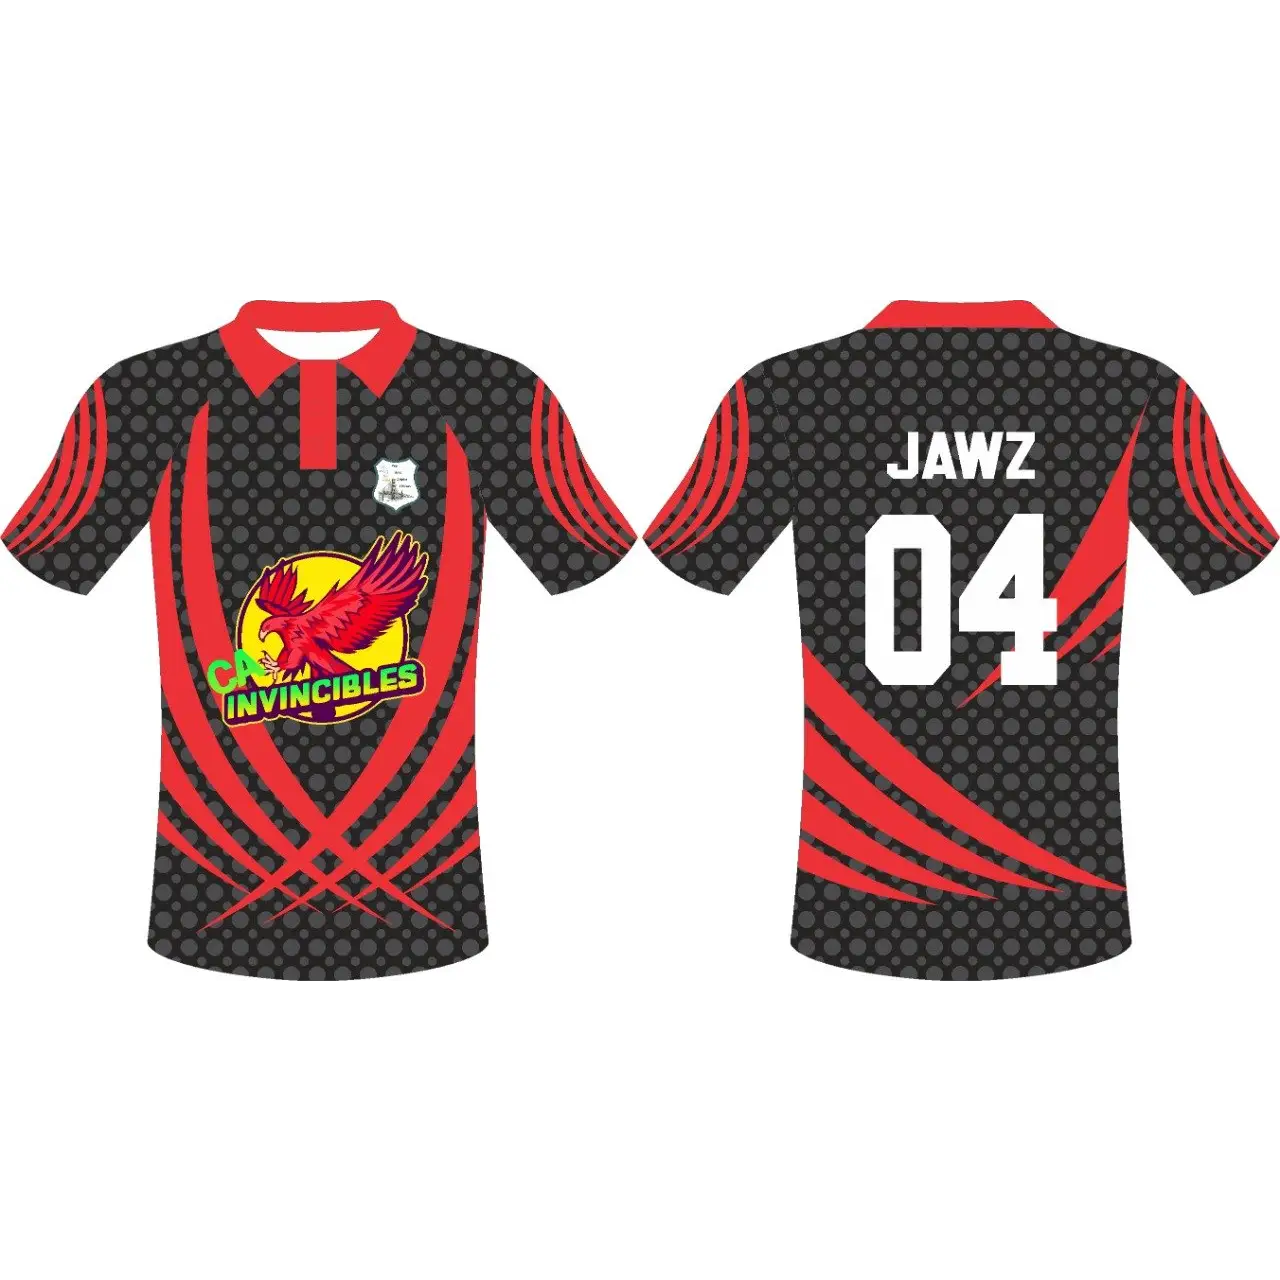 Cricket Jersey Black Red Kit With Name Number Logo - S-XL - Custom Cricket Jerseys